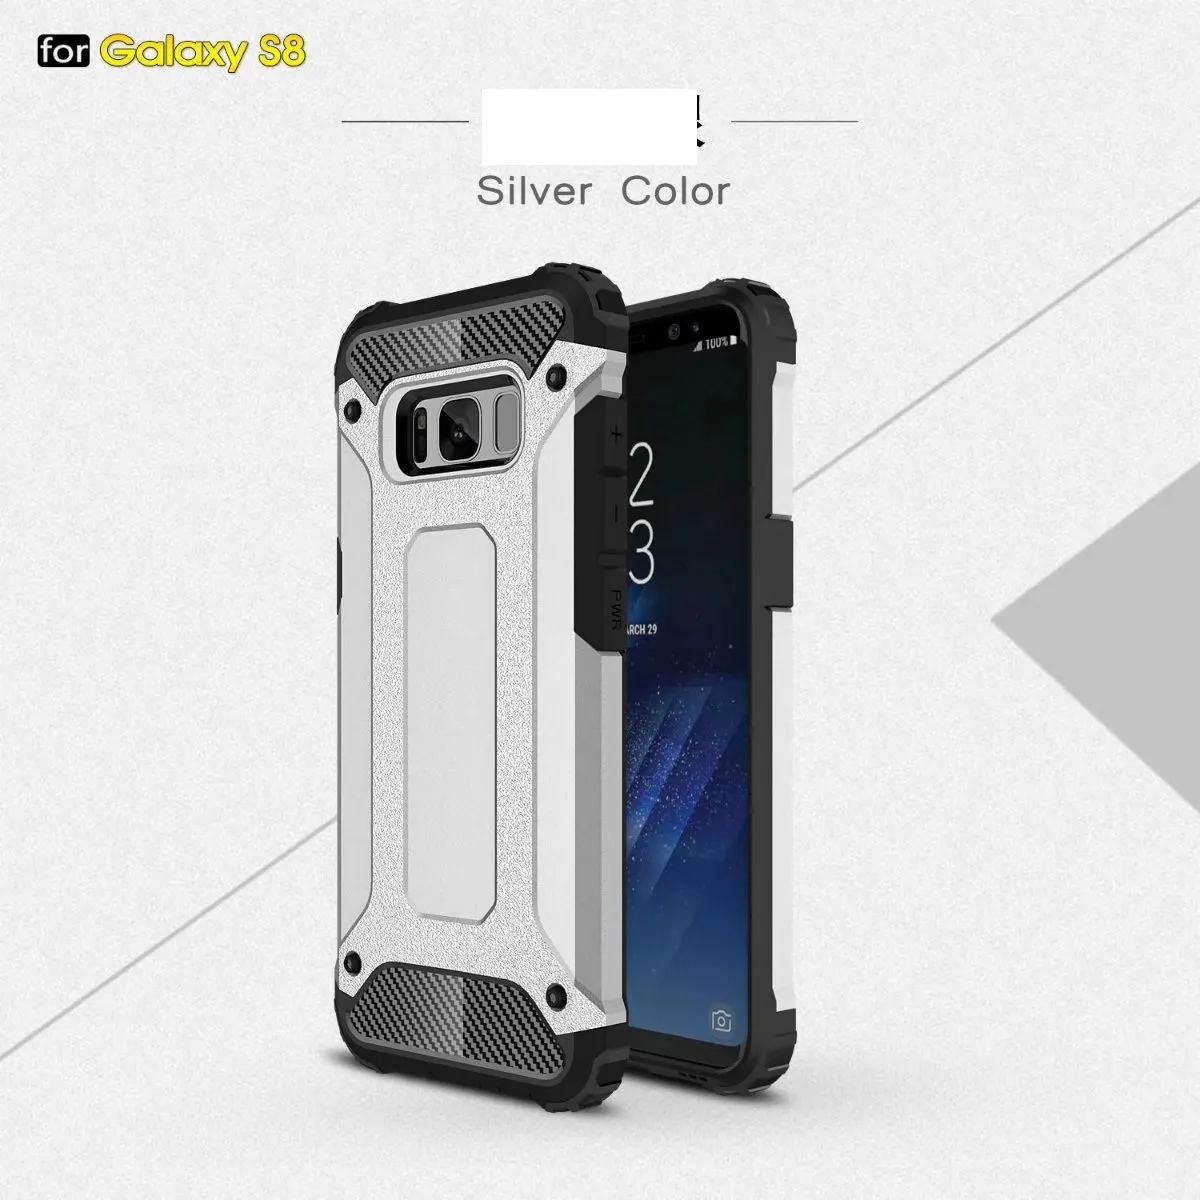 Armor Hybrid Defender Case TPU+PC Shockproof Cover Case FOR IPhone X XR XS XS MAX 5 se 6 7 8 plus Galaxy S5 S6 S7 S6 EDGE s8 S8 PLUS 